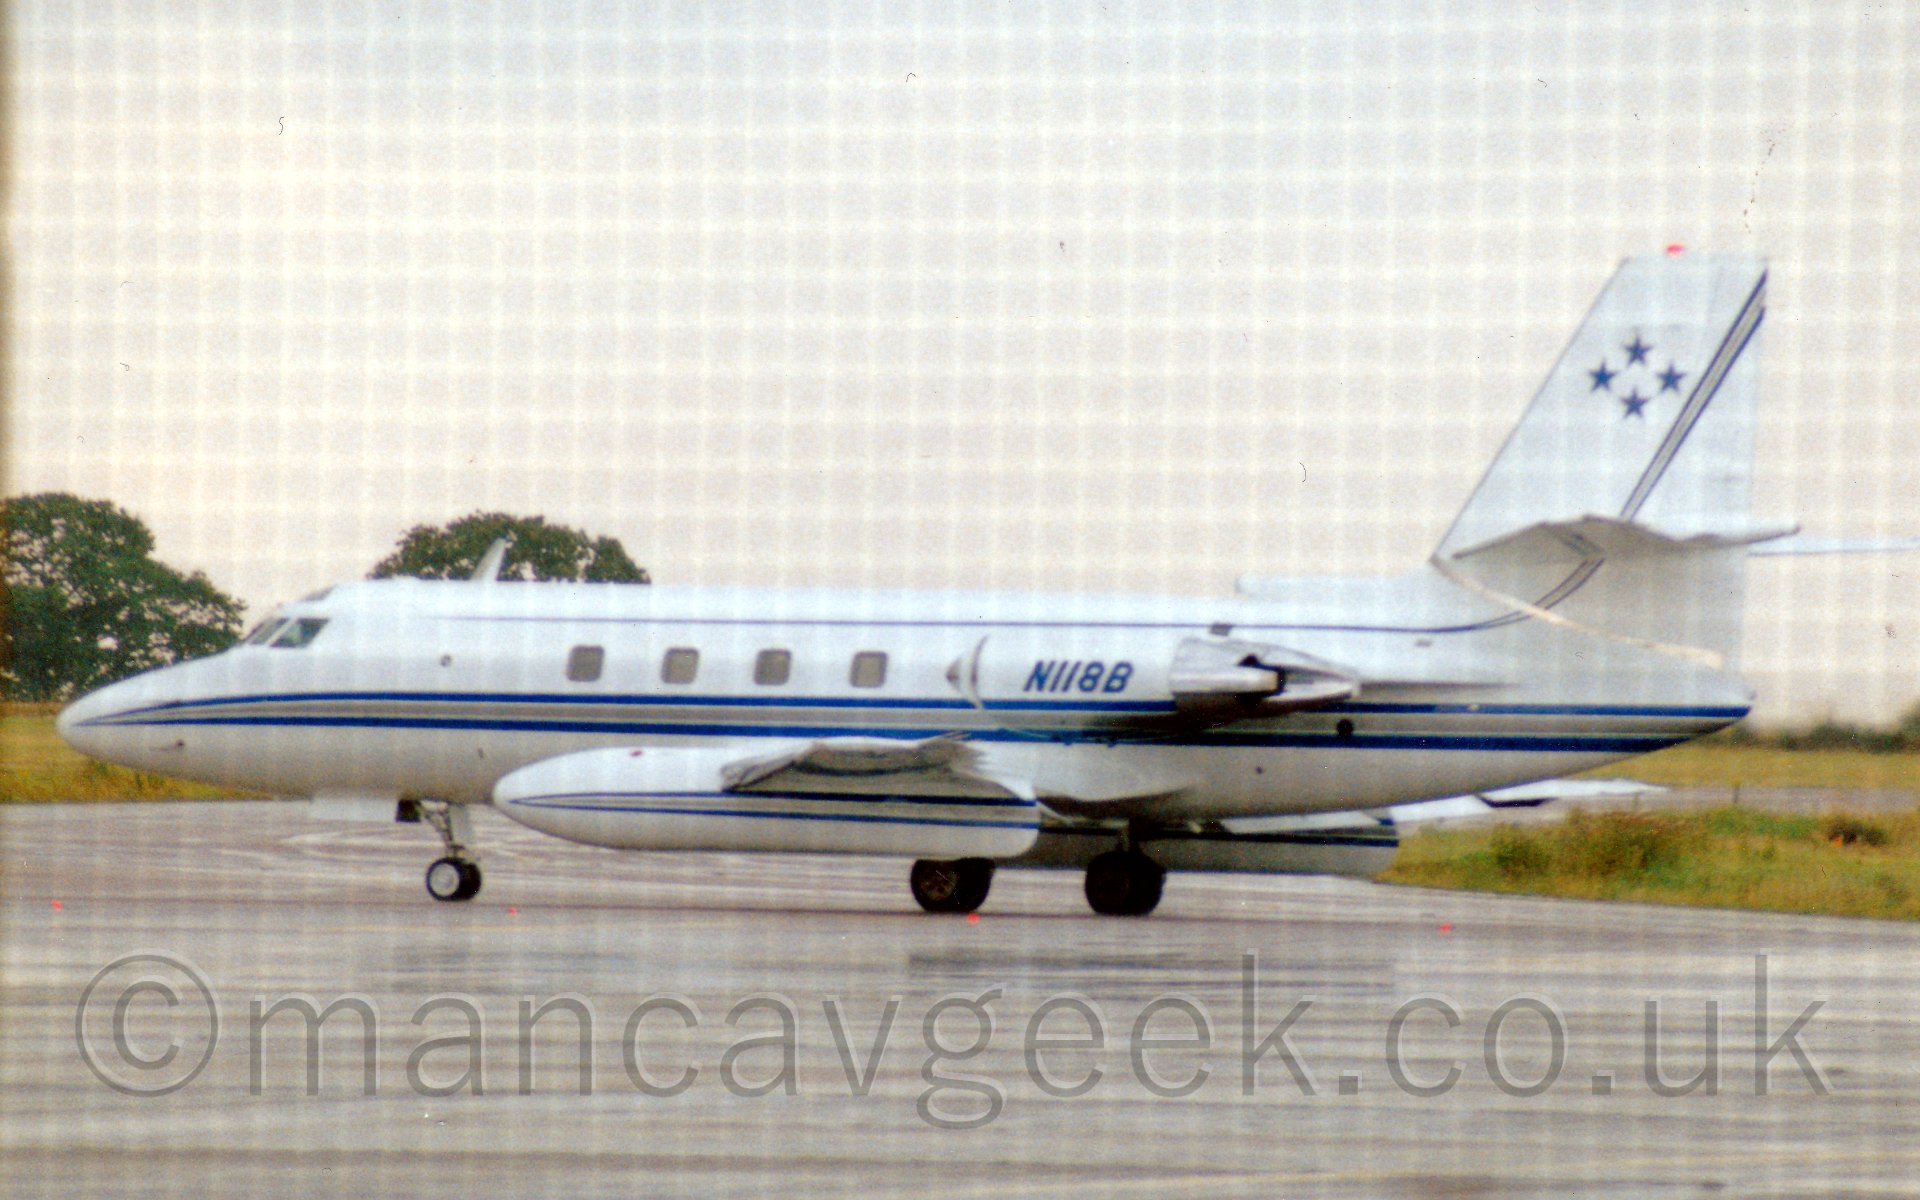 Side view of a 4 engined bizjet, with the engines mounted in pairs on either side of the rear fuselage, taxiing from right to left. The plane is mostly white, with a blue and grey cheatline running along the fuselage and lower parts of the engine pods, as well as along the wing-mounted external fueltanks. A second, thinner, blue cheatline runs along the top of the fuselage, sweeping up into the tail where it widens out to reveal the grey middle. The registration "N118B" is on the engione pods in blue, while the tail has 4 5 pointed blue stars arranged in a diamond pattern. In the background, grass runs off into the distance, with trees visible on the horizon on the left of the frame, under a bright but hazy sky. A fine, square moire pattern covers the entire image, probably caused by shooting through a fine mesh fence.